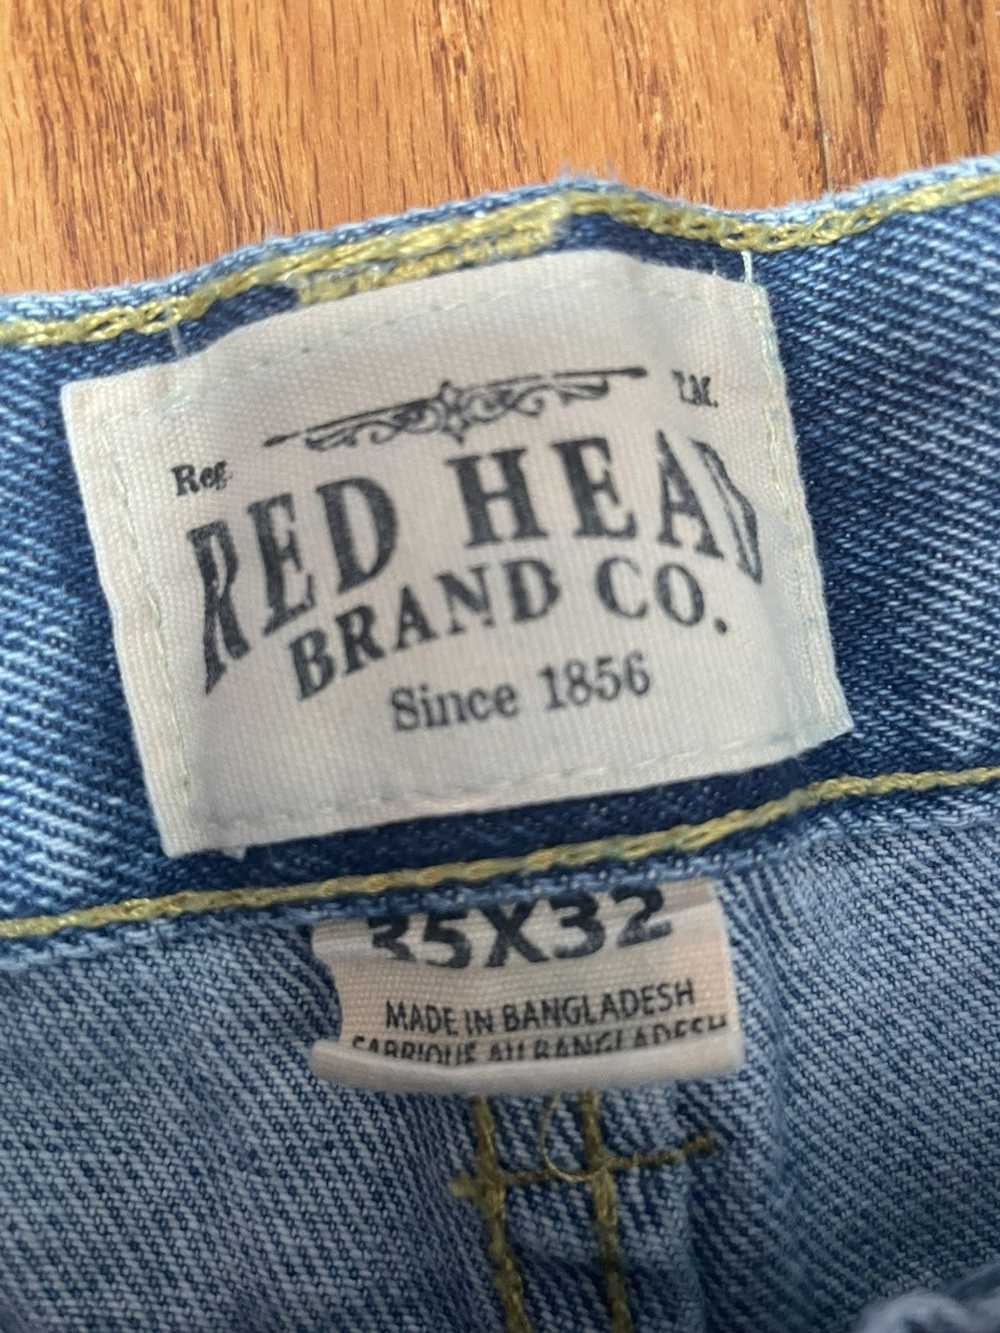 Red Head Red Head Brand Jeans - image 3